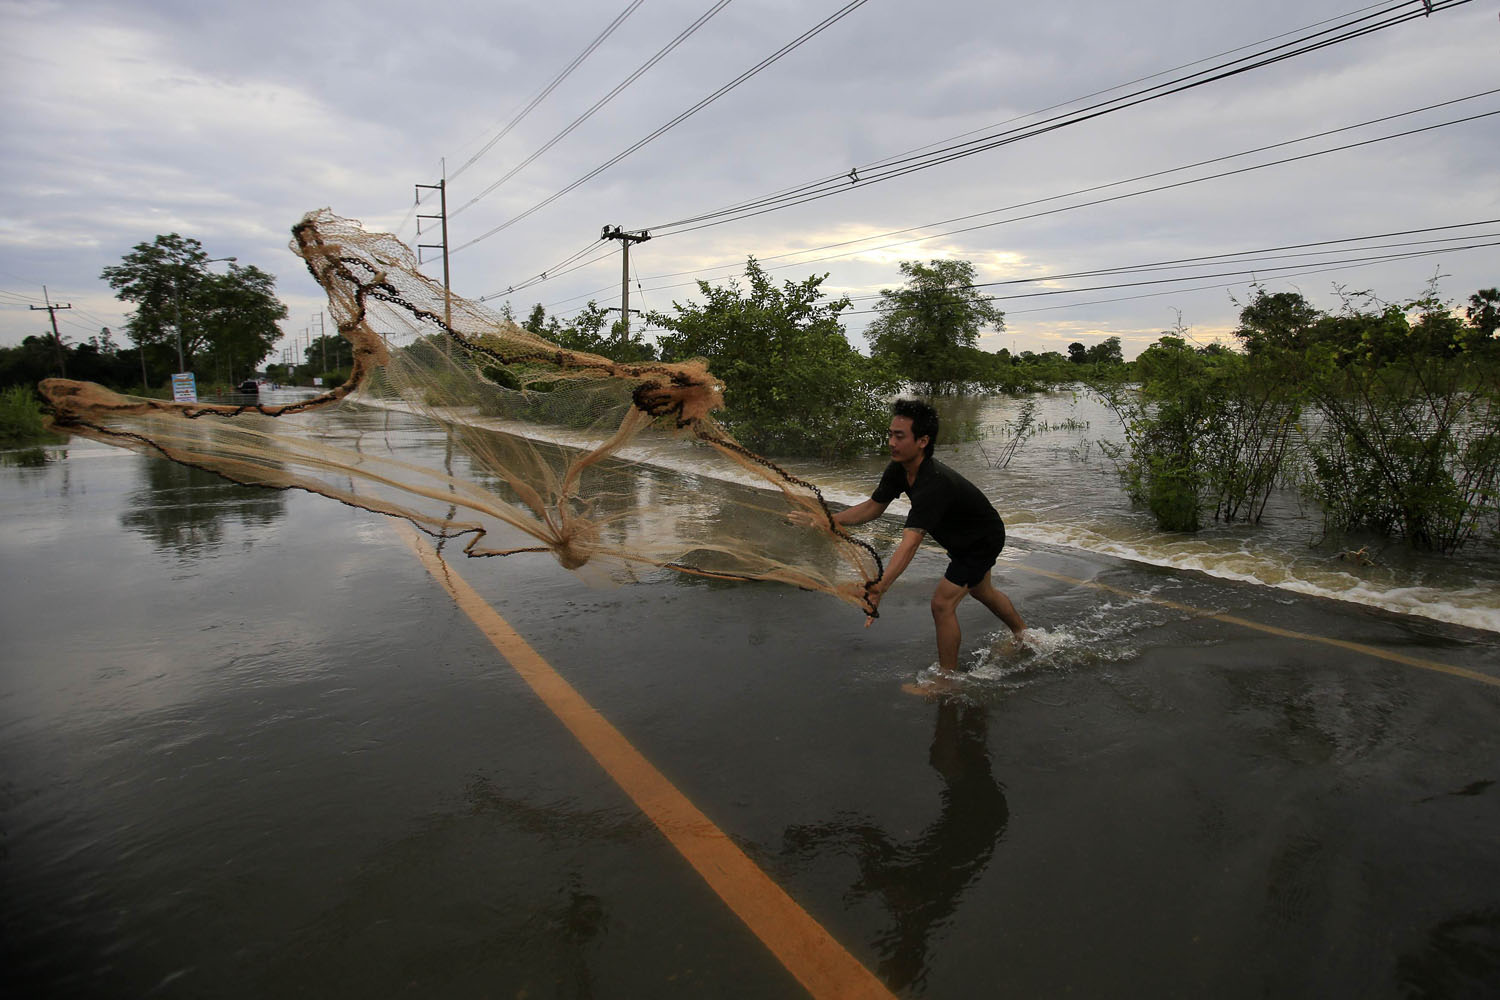 Sept. 29, 2013. A man casts a fishing net on a flooded street in the Srimahaphot district in Prachin Buri, Thailand.